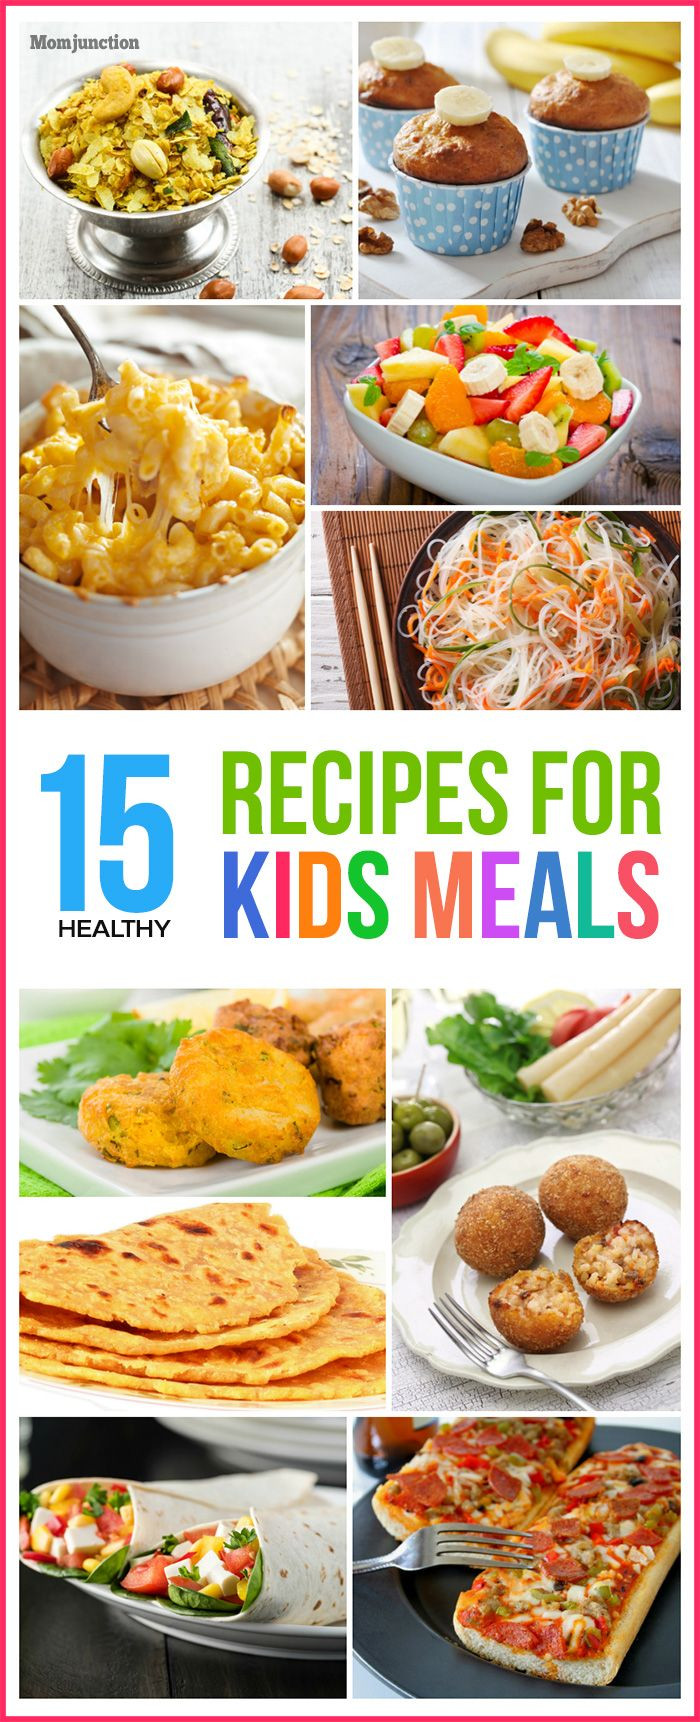 Recipes For Dinner For Kids
 Top 15 Healthy Recipes For Kids Meals